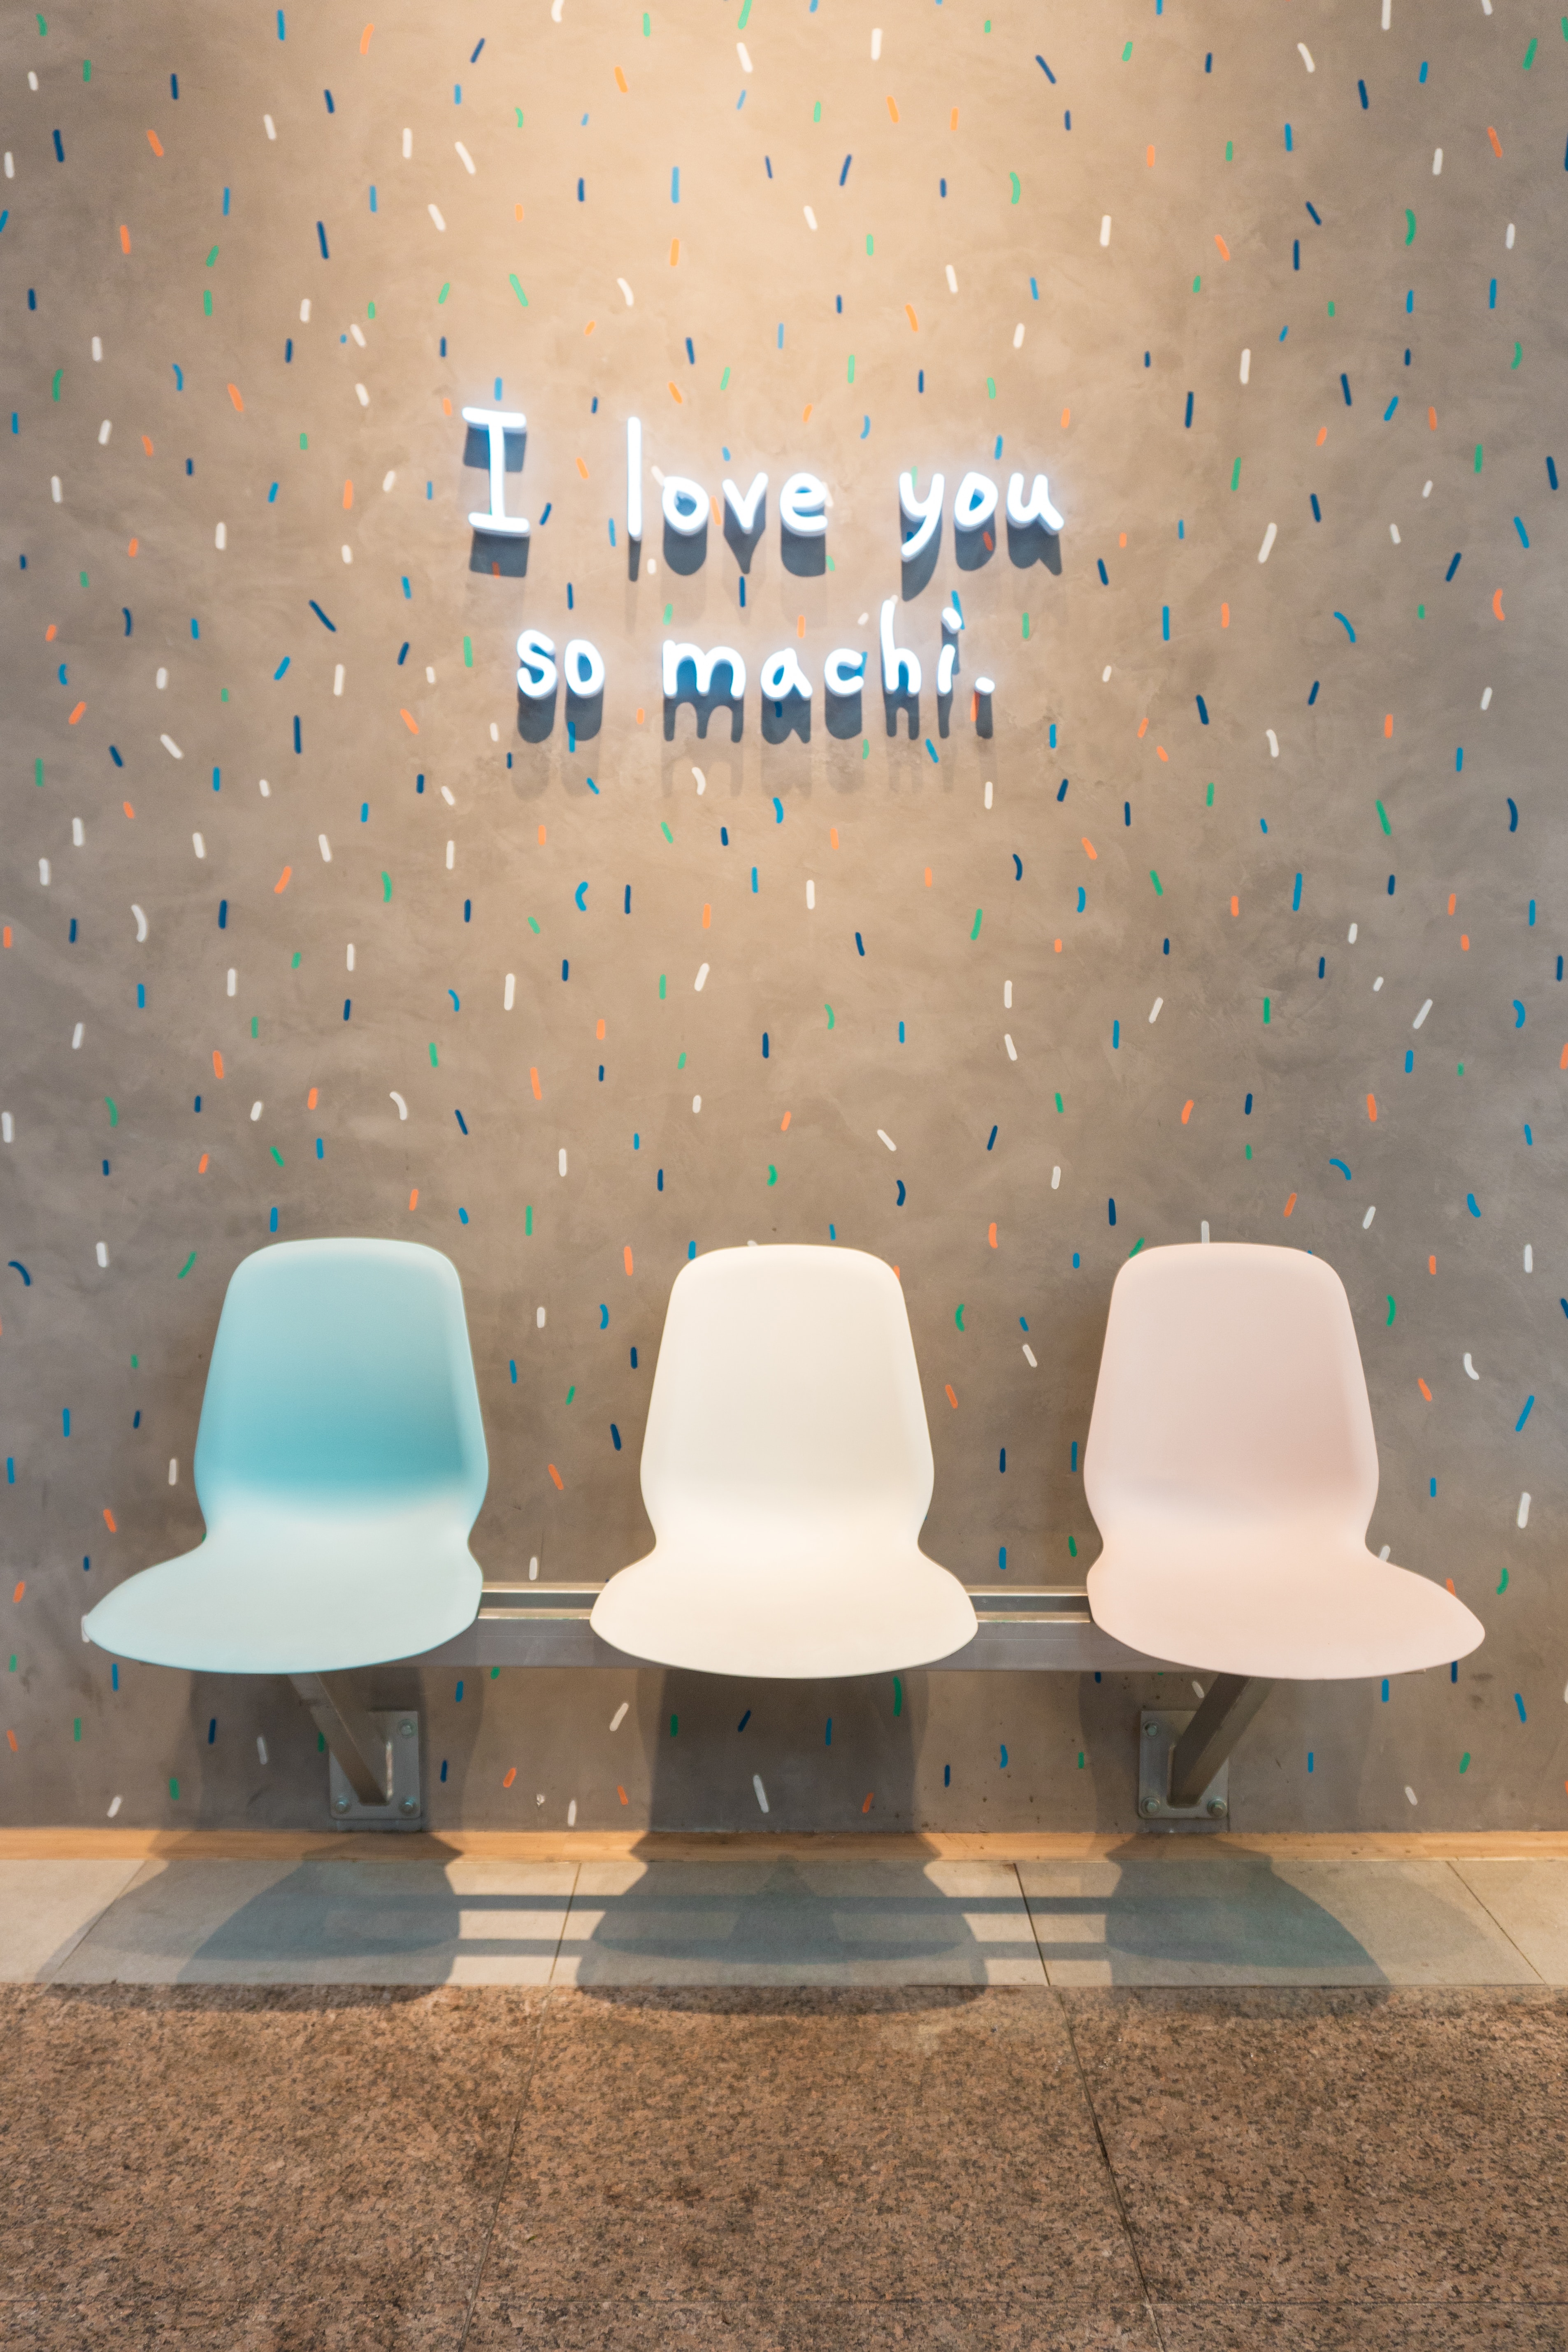 words, wall, inscription, text, sign, signboard, chairs, armchairs